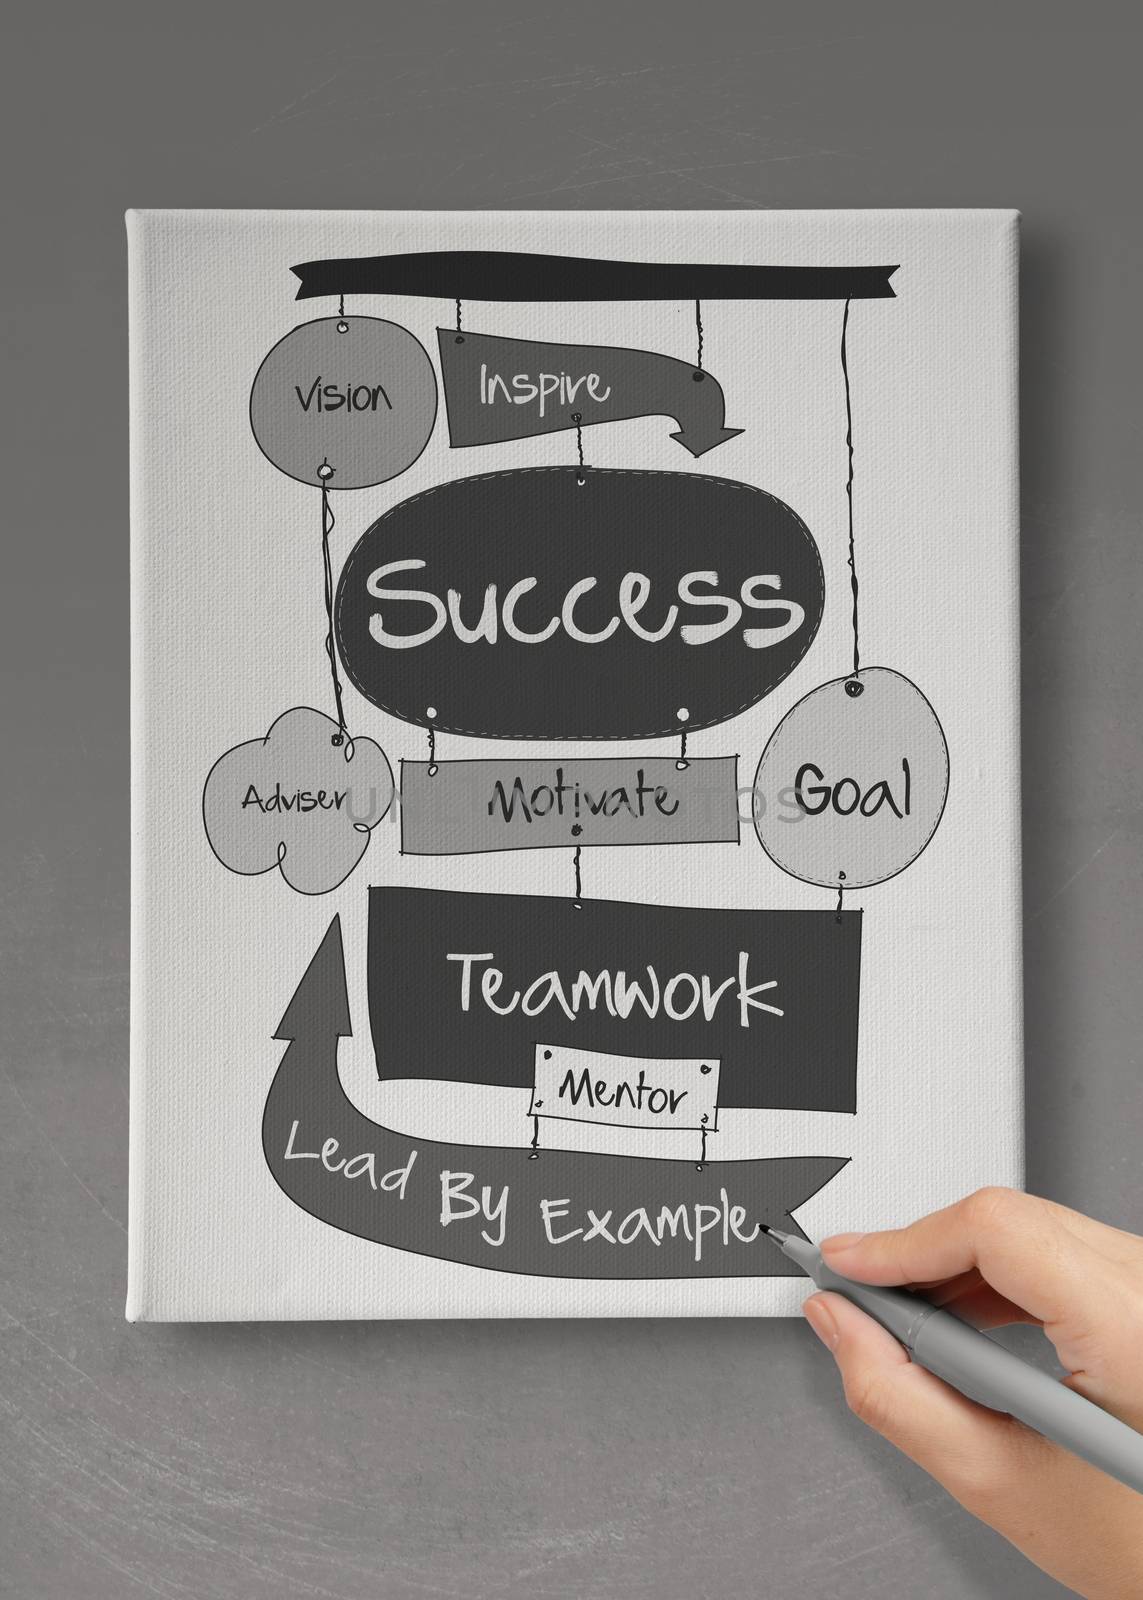 hand drawn SUCCESS business diagram on canvas board as concept